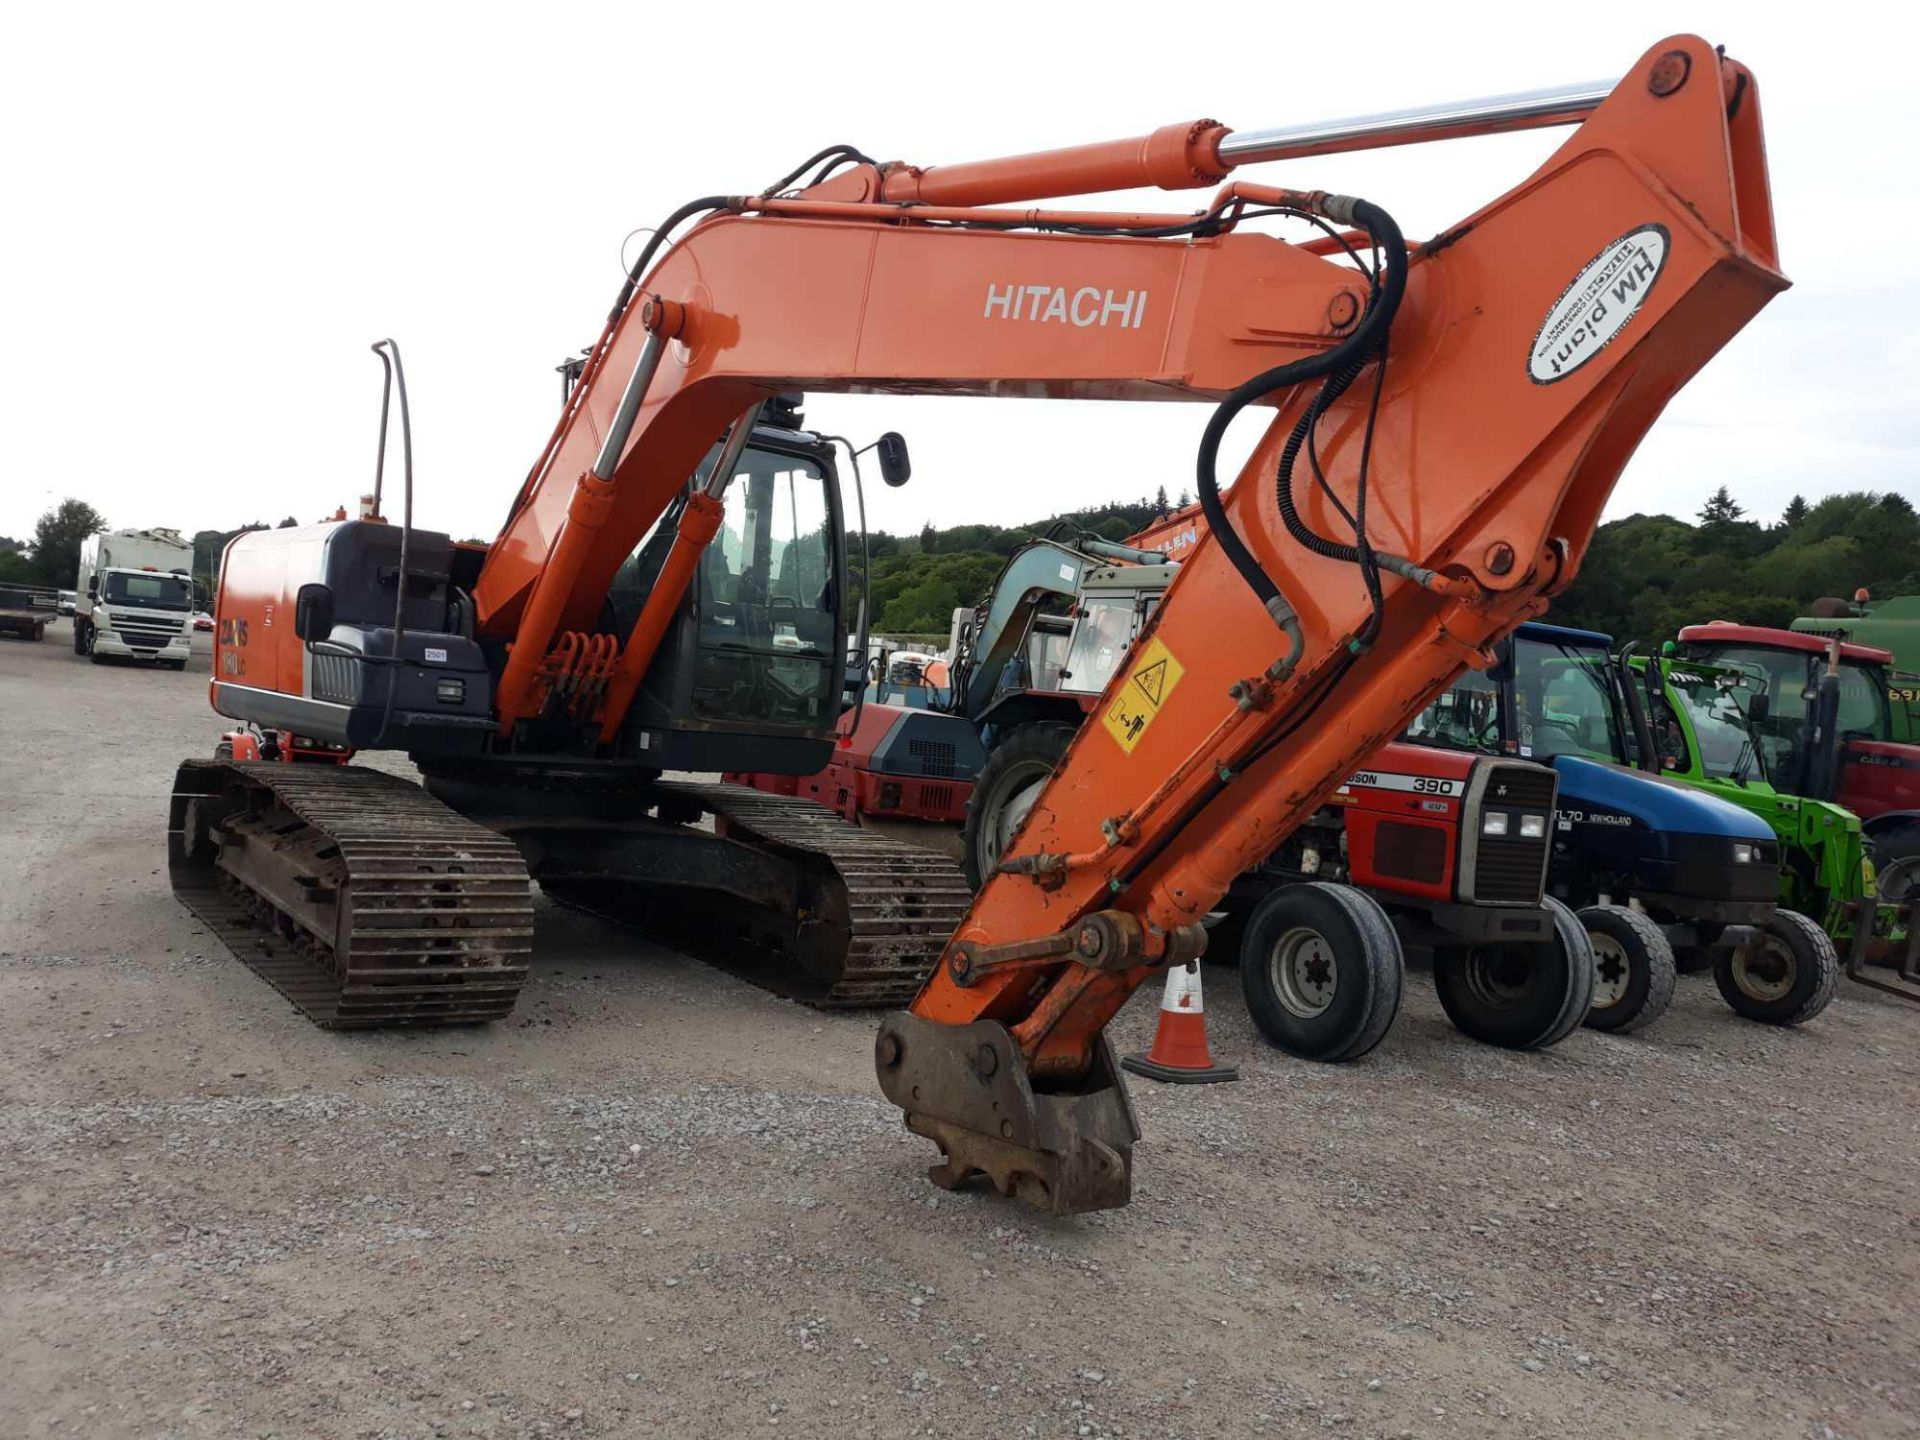 Hitachi ZX180LC-3 Excavator, Year 2008, 8140 hours displayed - not warranted, Key in PC, + VAT